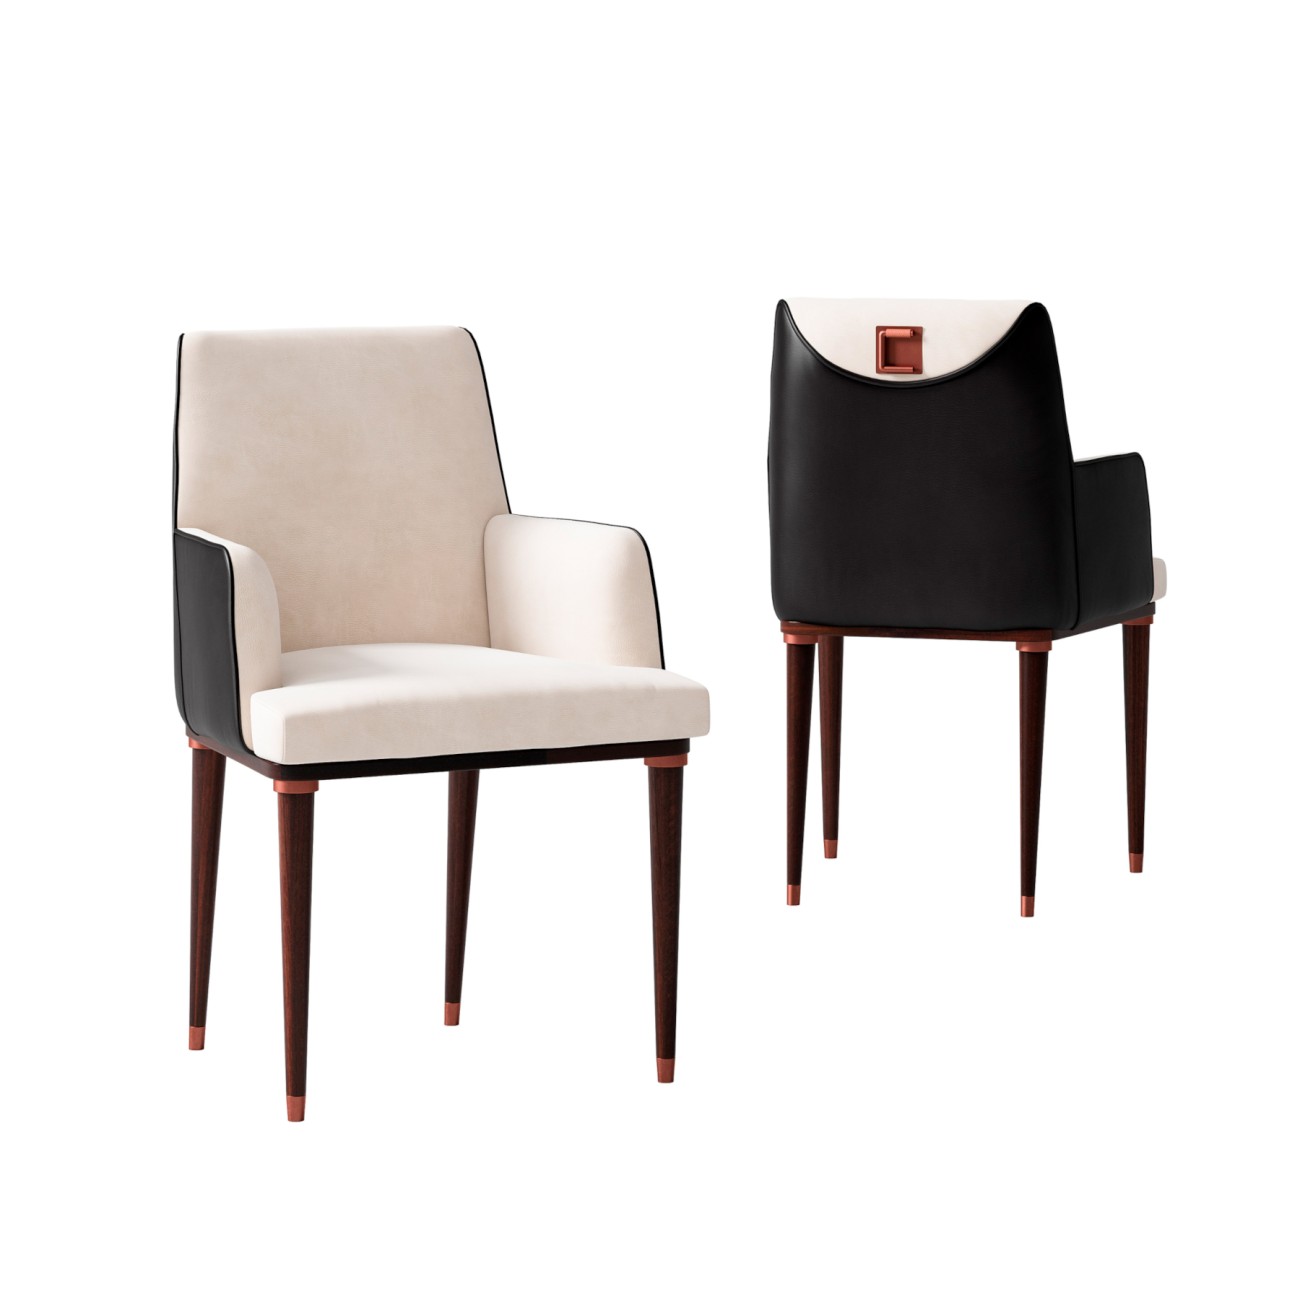 Sesto Senso Chair With Armrests CPRN Homood